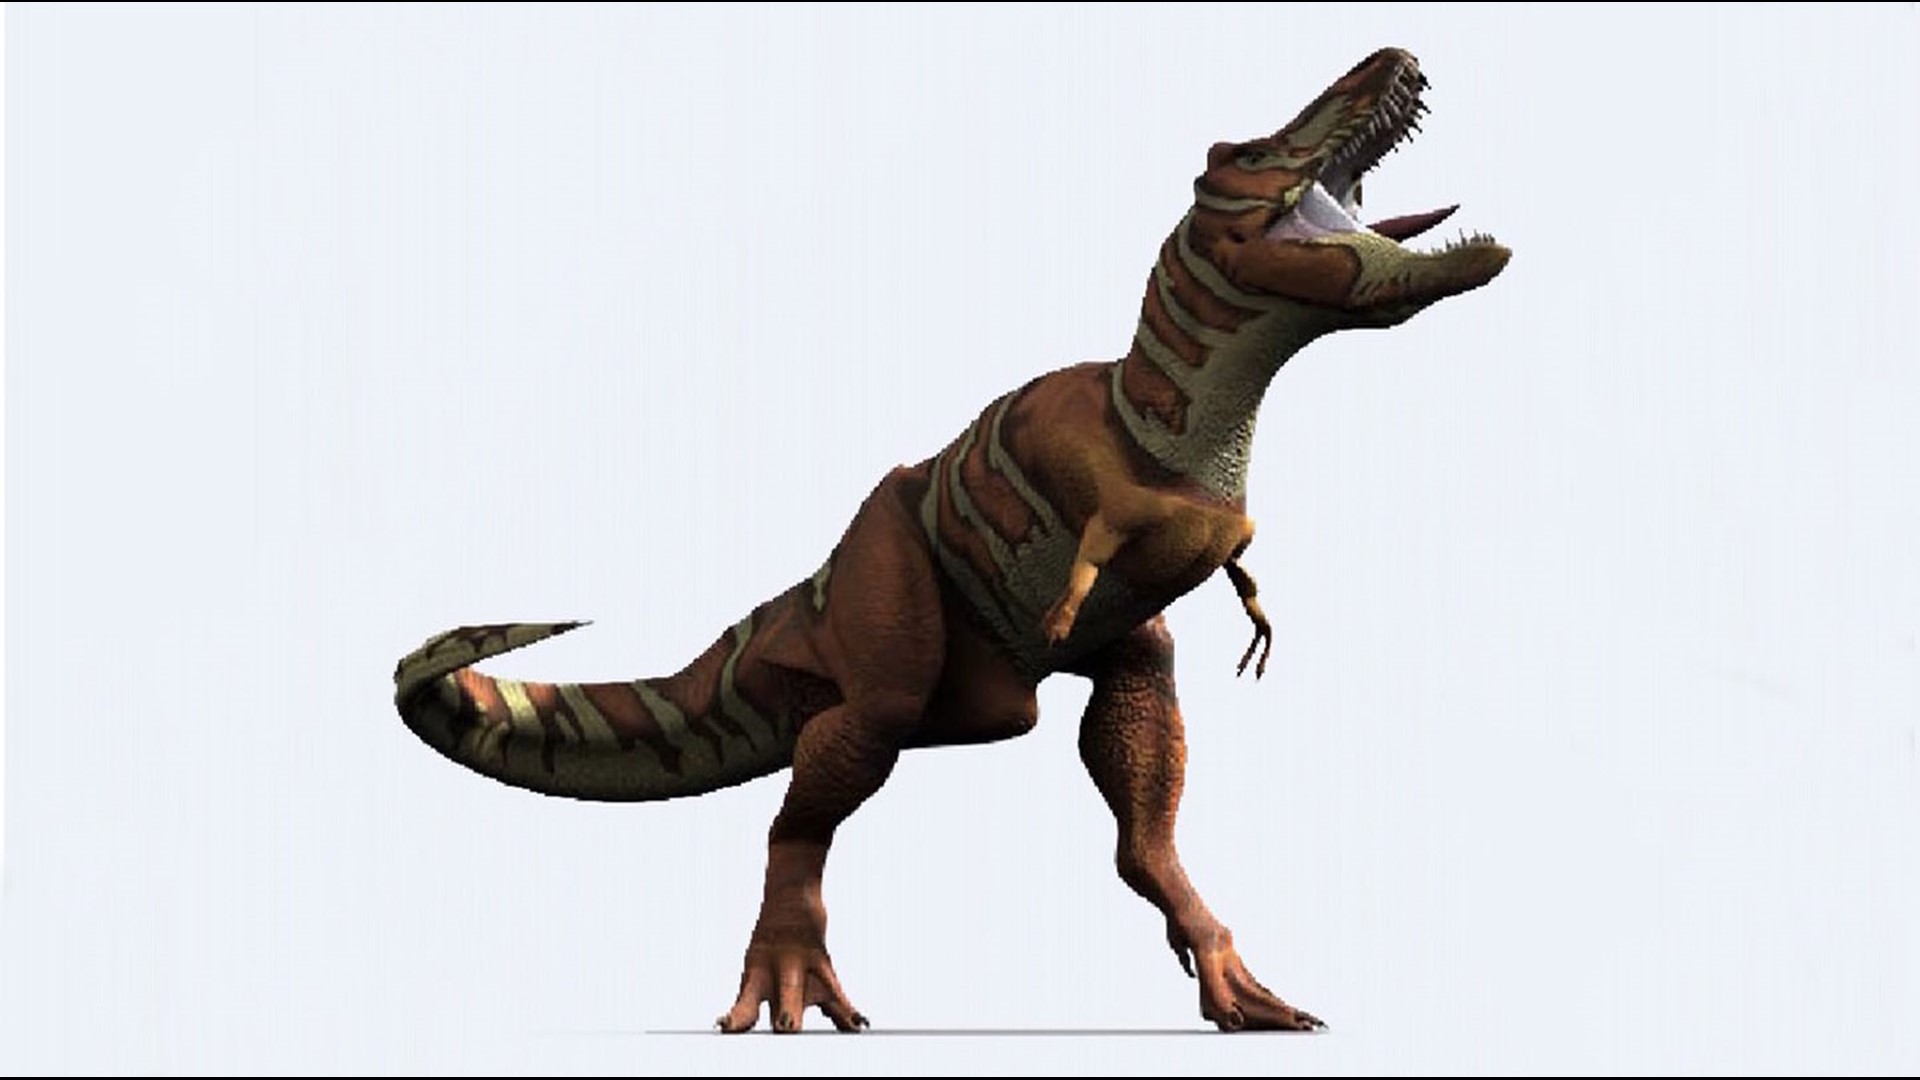 The tyrannosaur, discovered in 2012 on Sucia Island, predates Tyrannosaurus Rex by about 15,000,000 years.